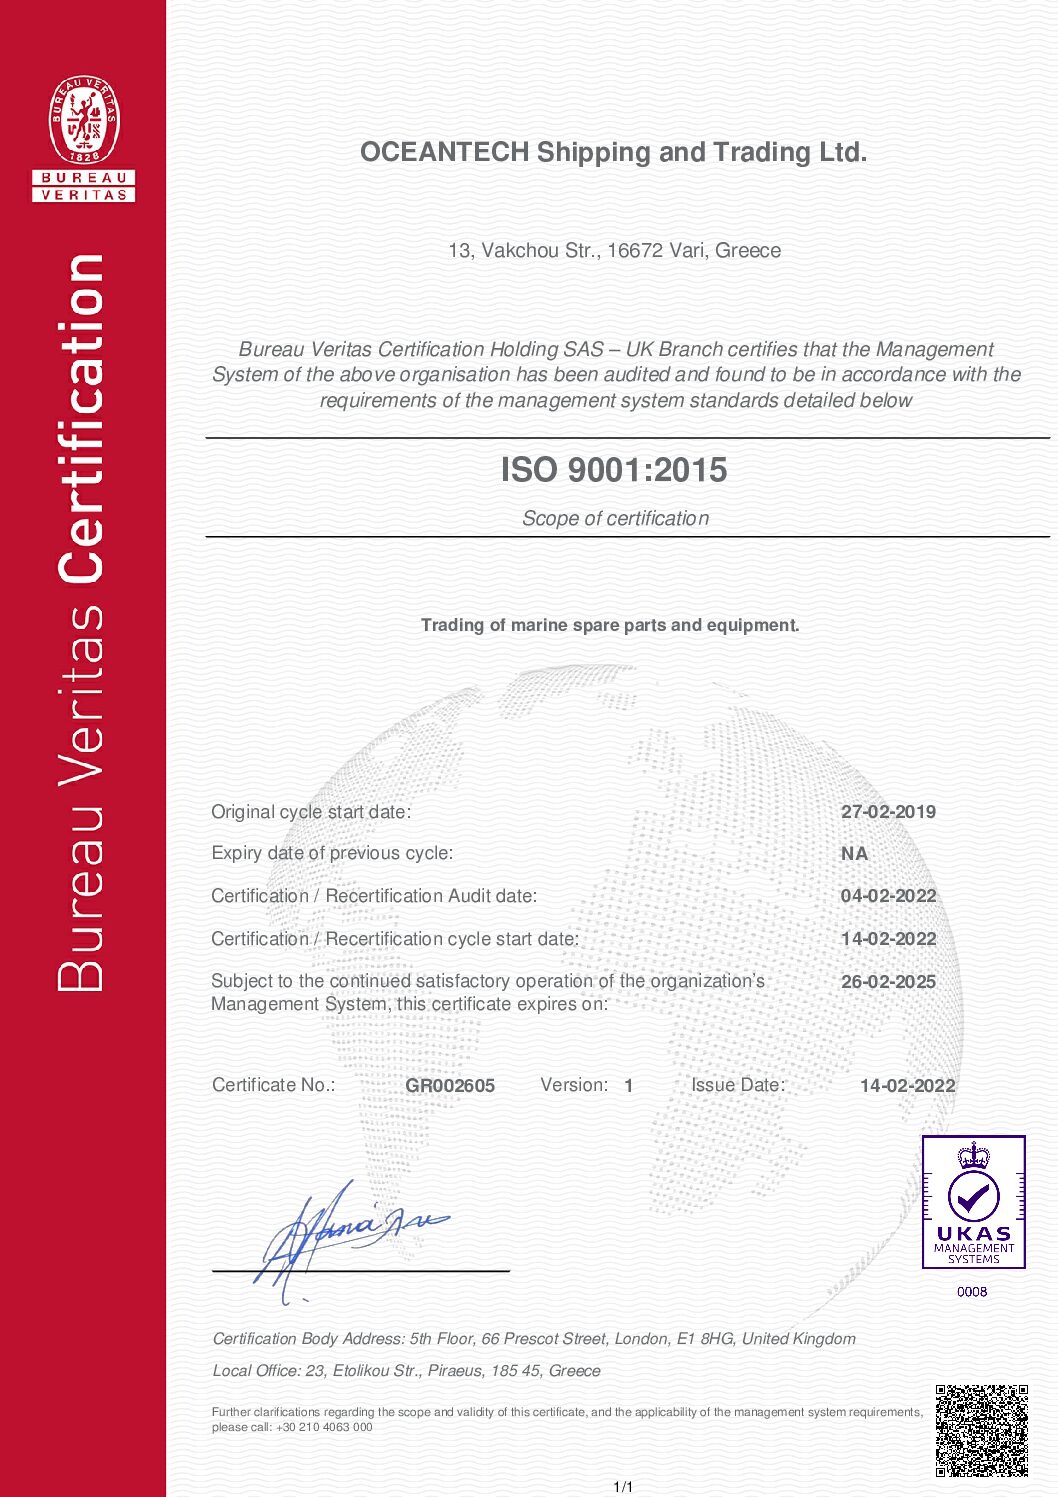 Oceantech Shipping & Trading updated Feb - 2022 ISO 9001: 2015 certificate